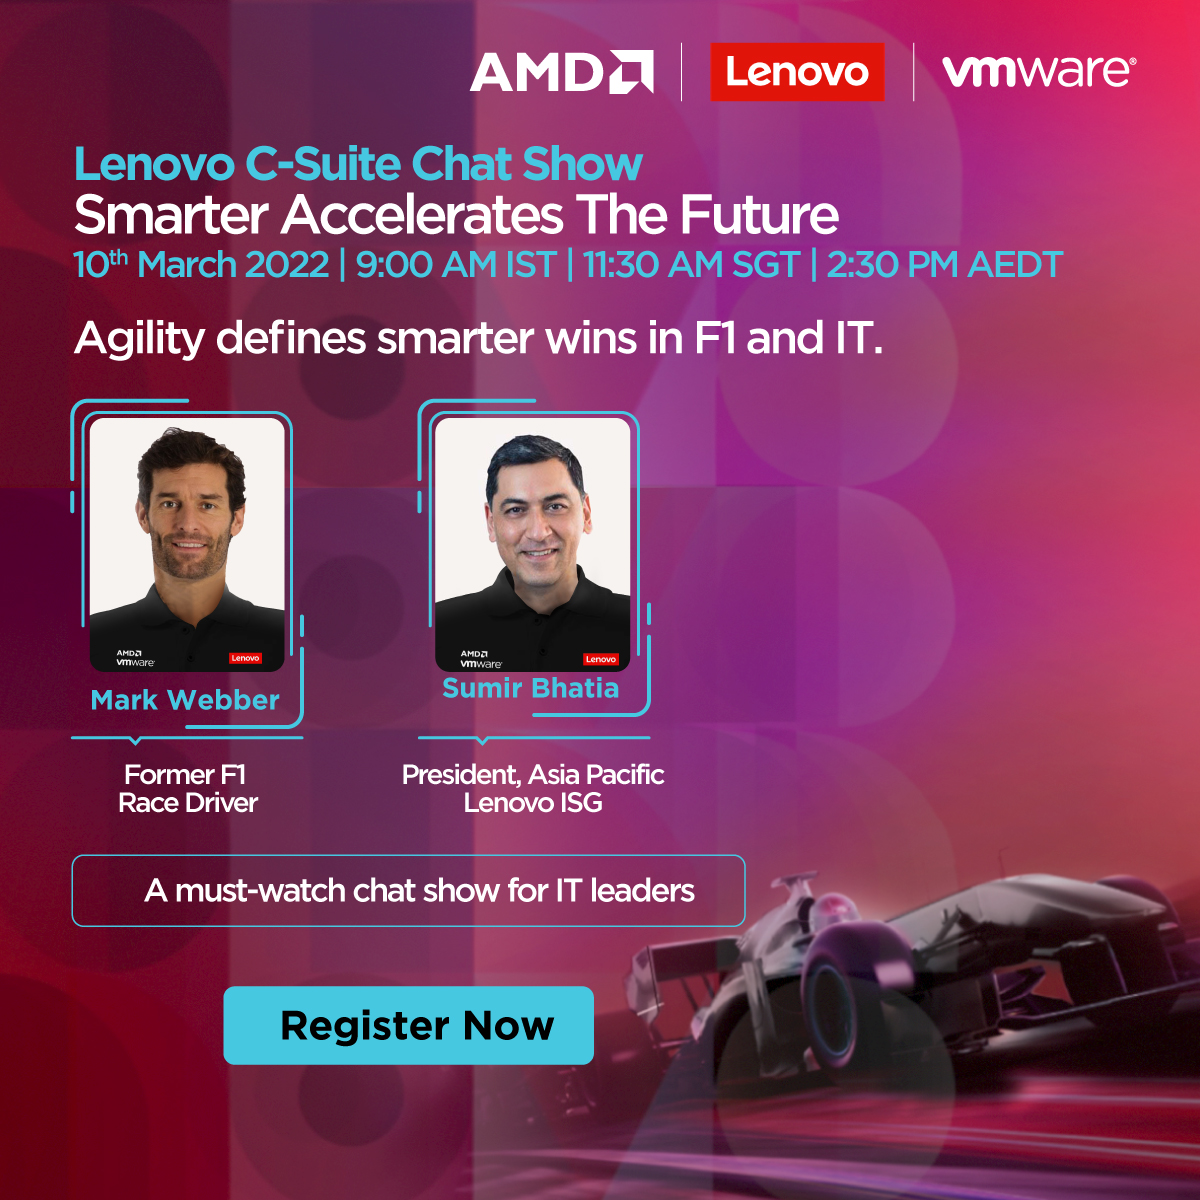 Did you know that the fastest F1 pitstop was just 1.82 seconds? This requires optimum efficiency and synergy. Join us as we draw the parallels between the 2 worlds of F1 & IT on the role of smarter partnership: https://t.co/idSODhMnLZ 

#LenovoChatShow #LenovoISG https://t.co/XBVBYDdkLf